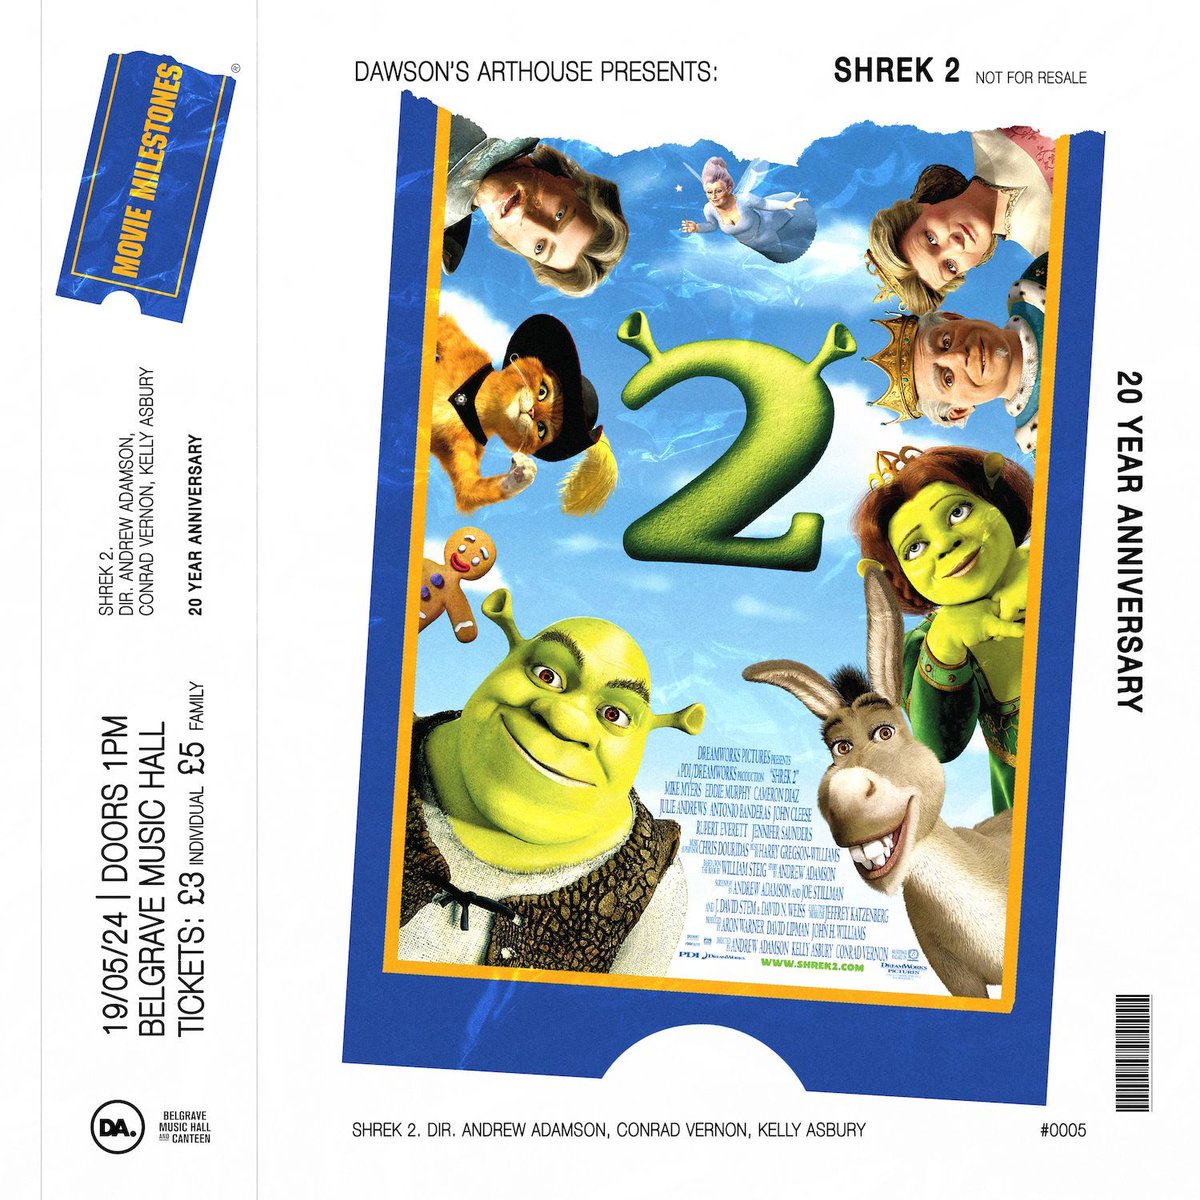 link.dice.fm/h2fcb97215ff Celebrate the 20th Anniversary of the internet's favourite Ogre as Dawsons Arthouse presents: Shrek 2 (2001) 🦠 Grab a burger, grab a sofa and enjoy a Sunday Screening with the family. Group and individual tickets available now on DICE.